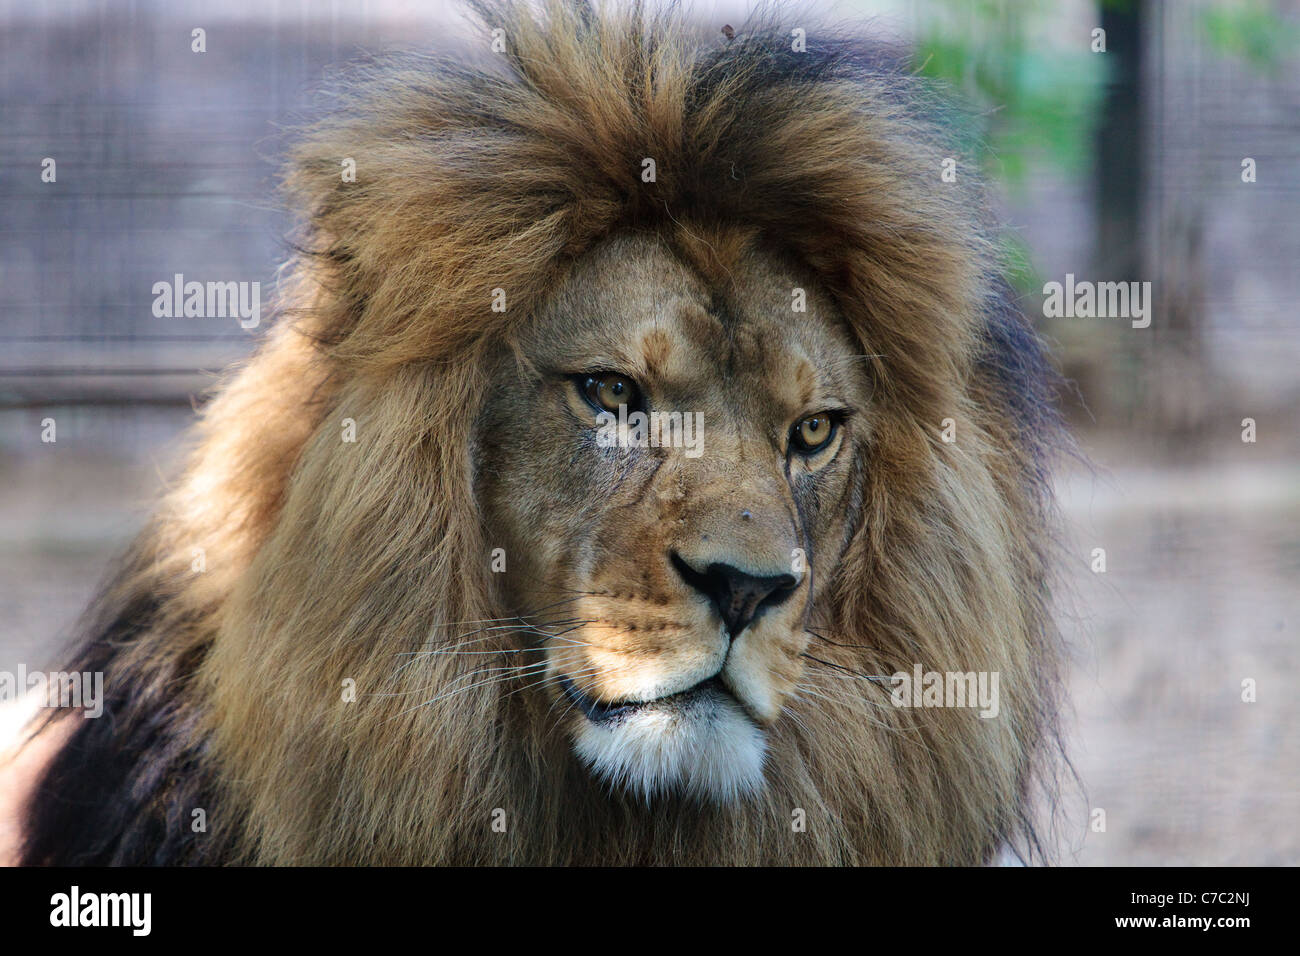 The Barbary Lion | Lions photos, National animal, Lion pictures